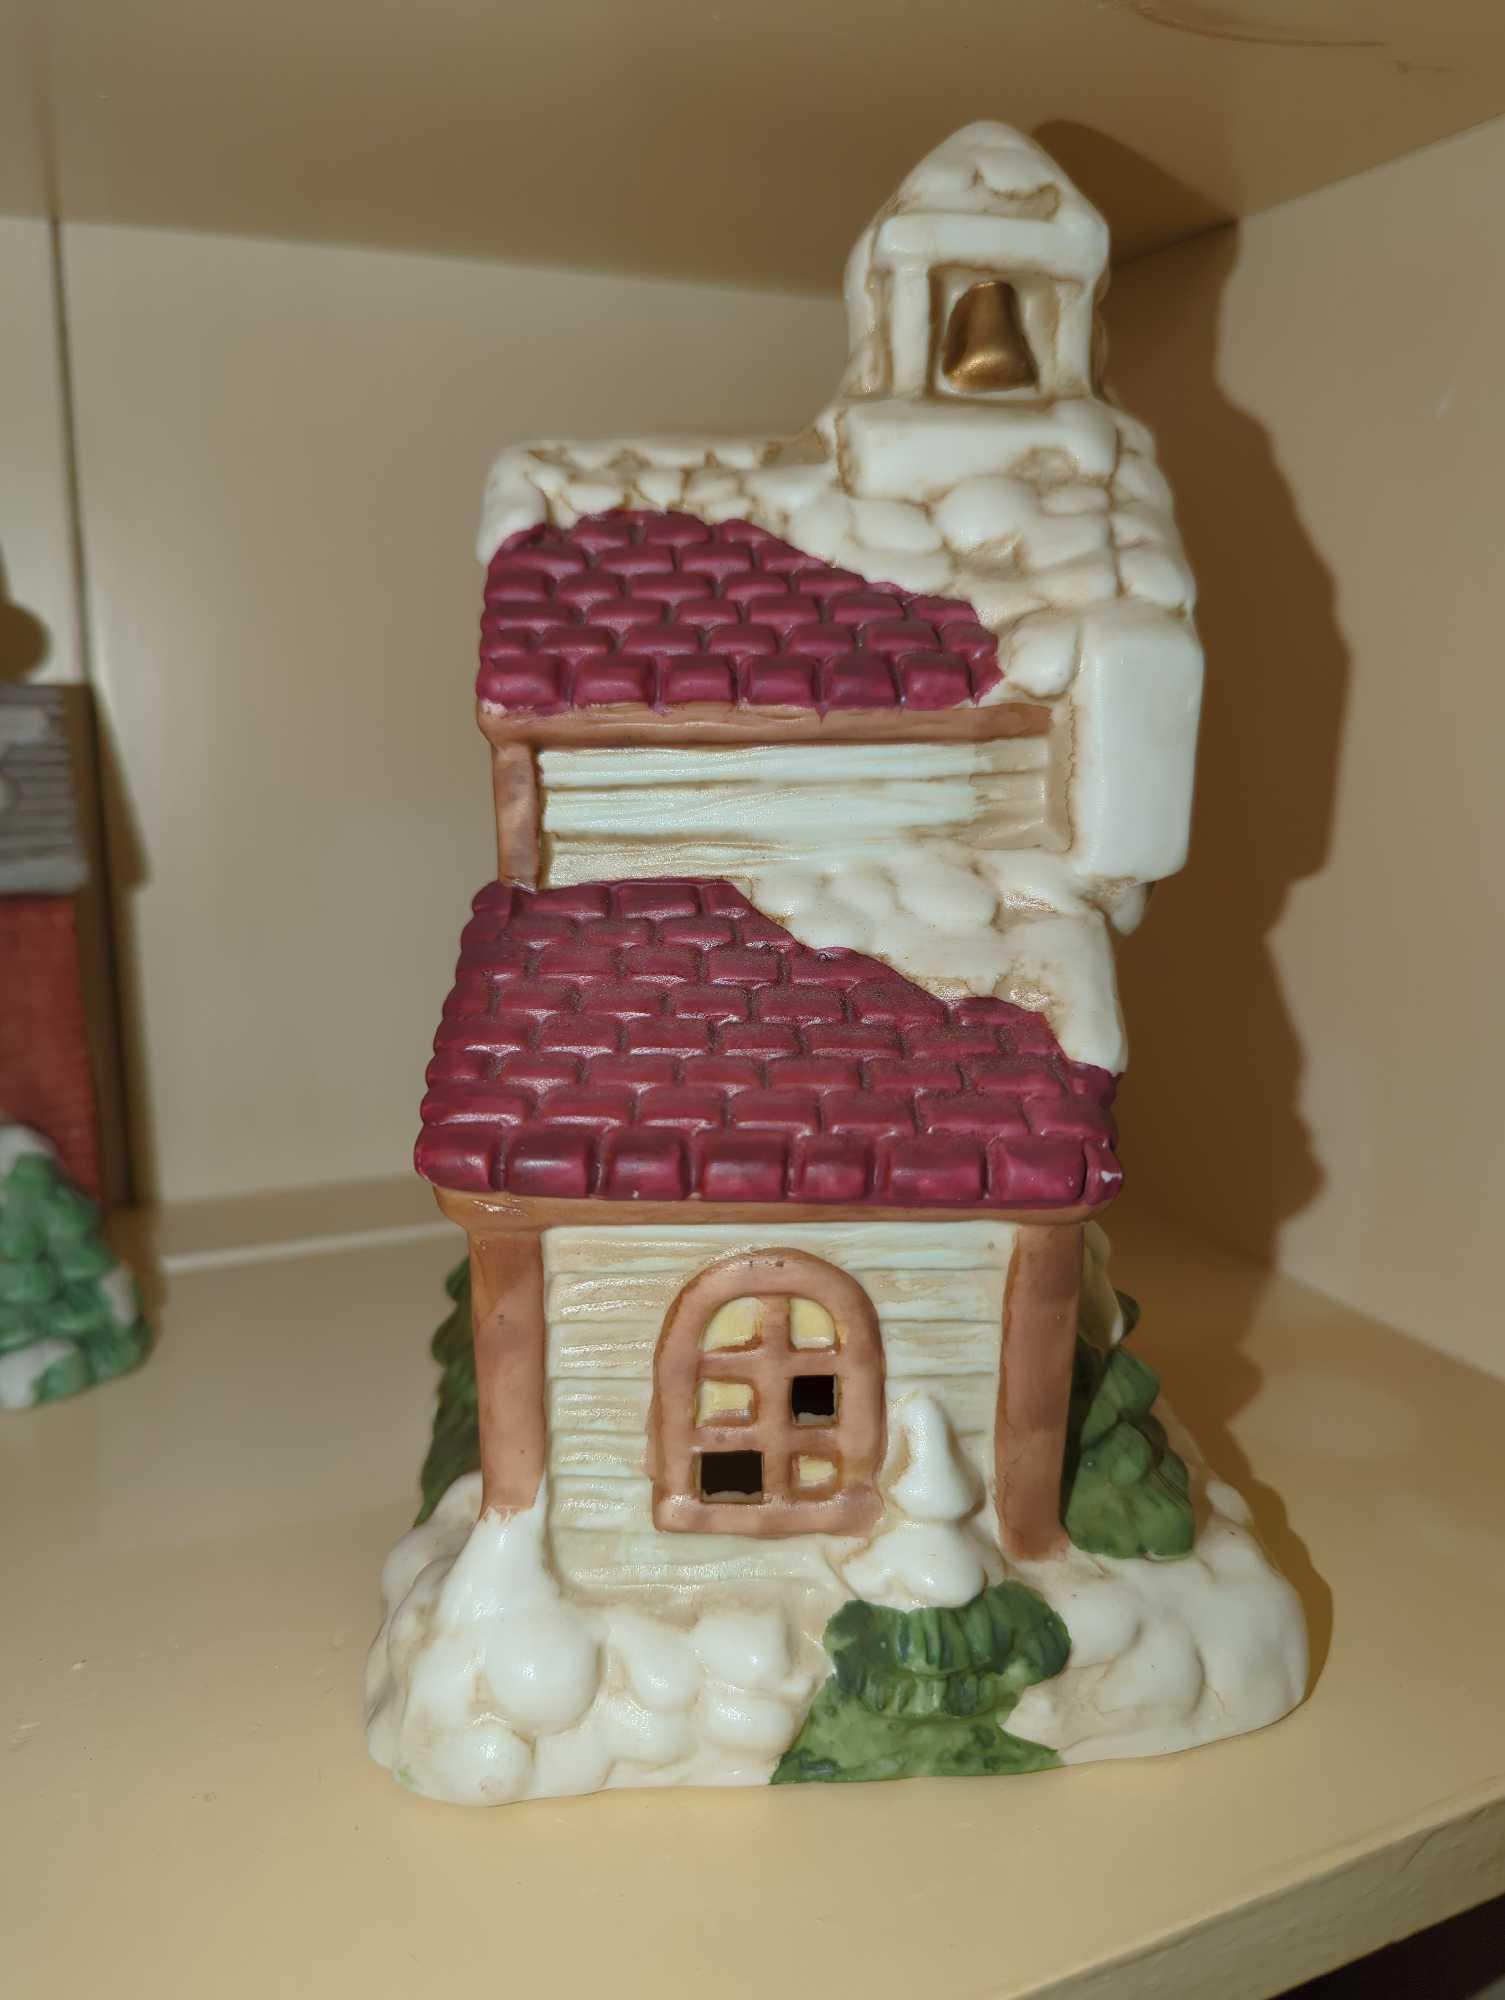 (No Light) Memories Collection Porcelain School House Village Collection Christmas, Retail Price